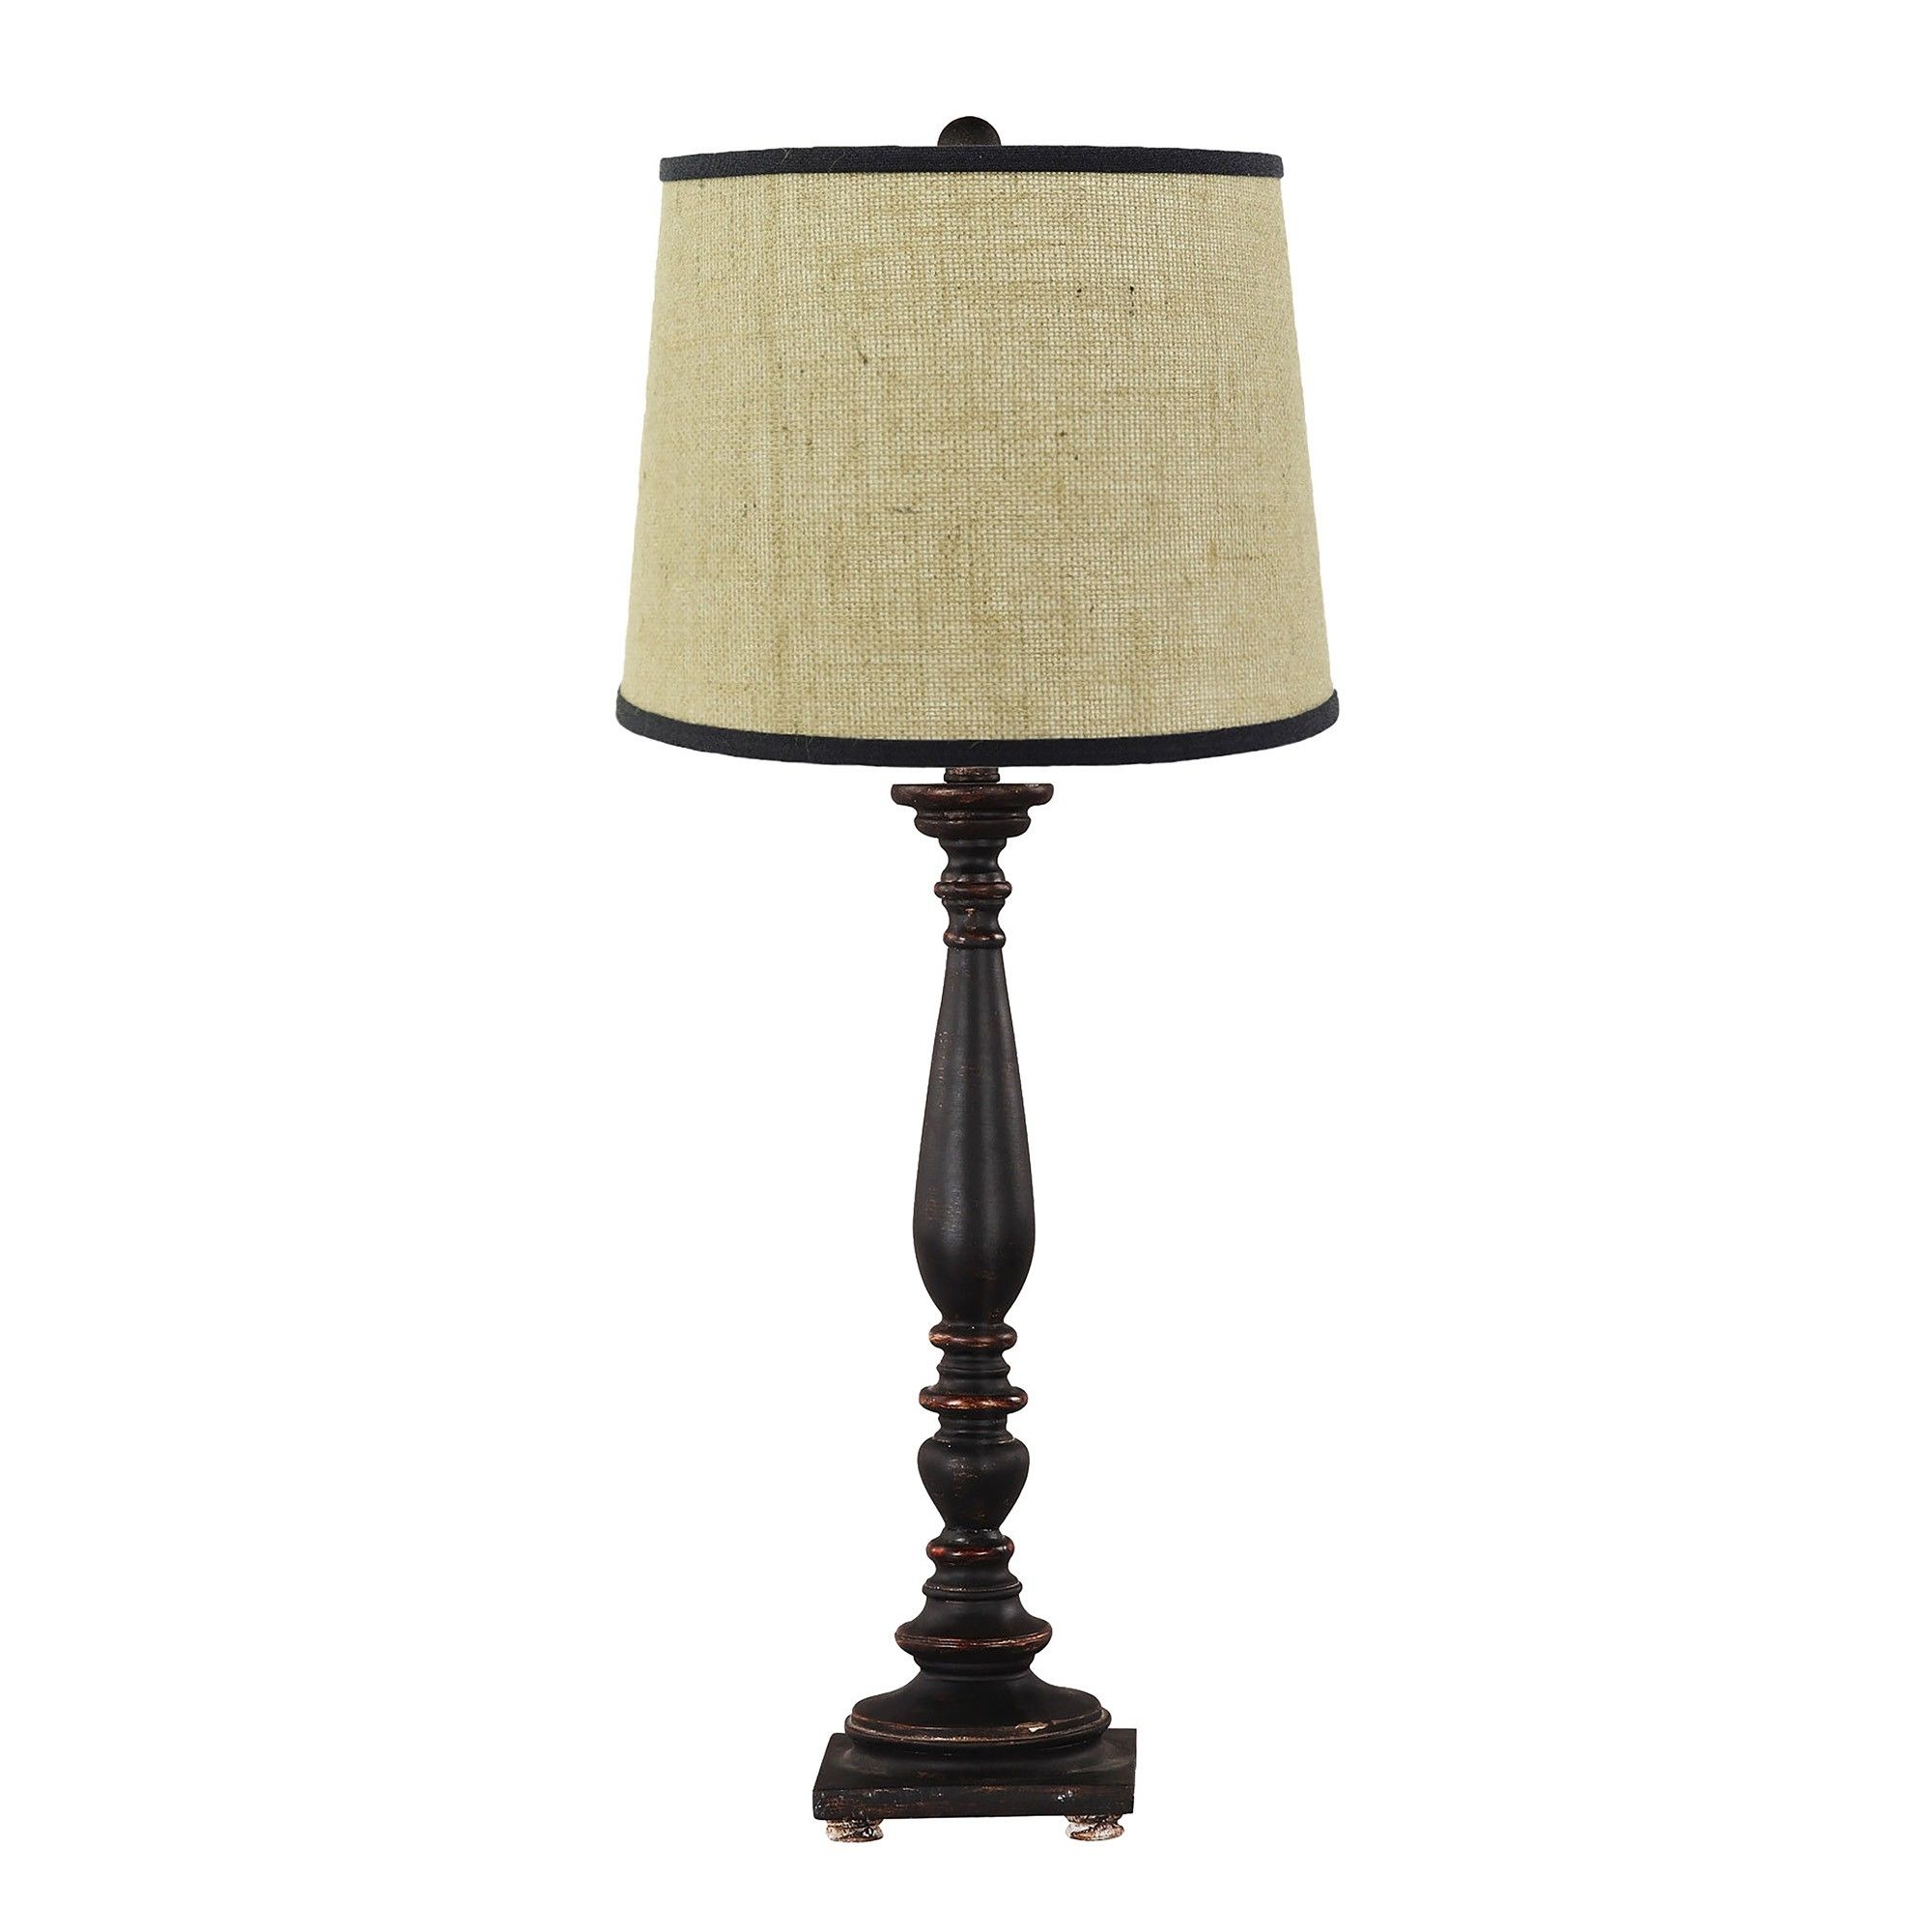 70 Most Peerless Living Room Lamps Nightstand For Bedroom Black And Regarding Gold Living Room Table Lamps (View 11 of 15)